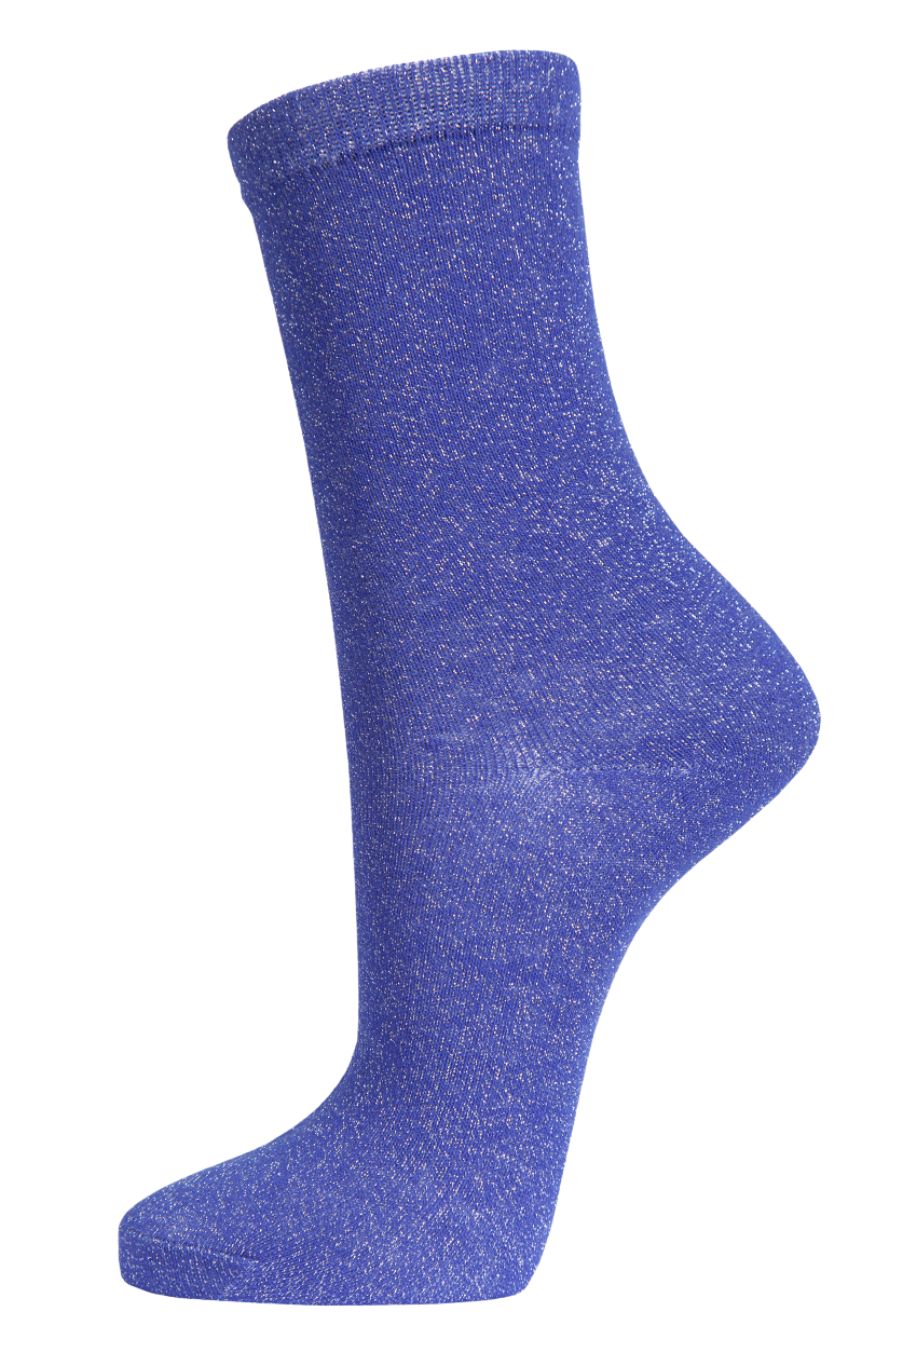 blue ankle socks with all over silver glitter shimmer